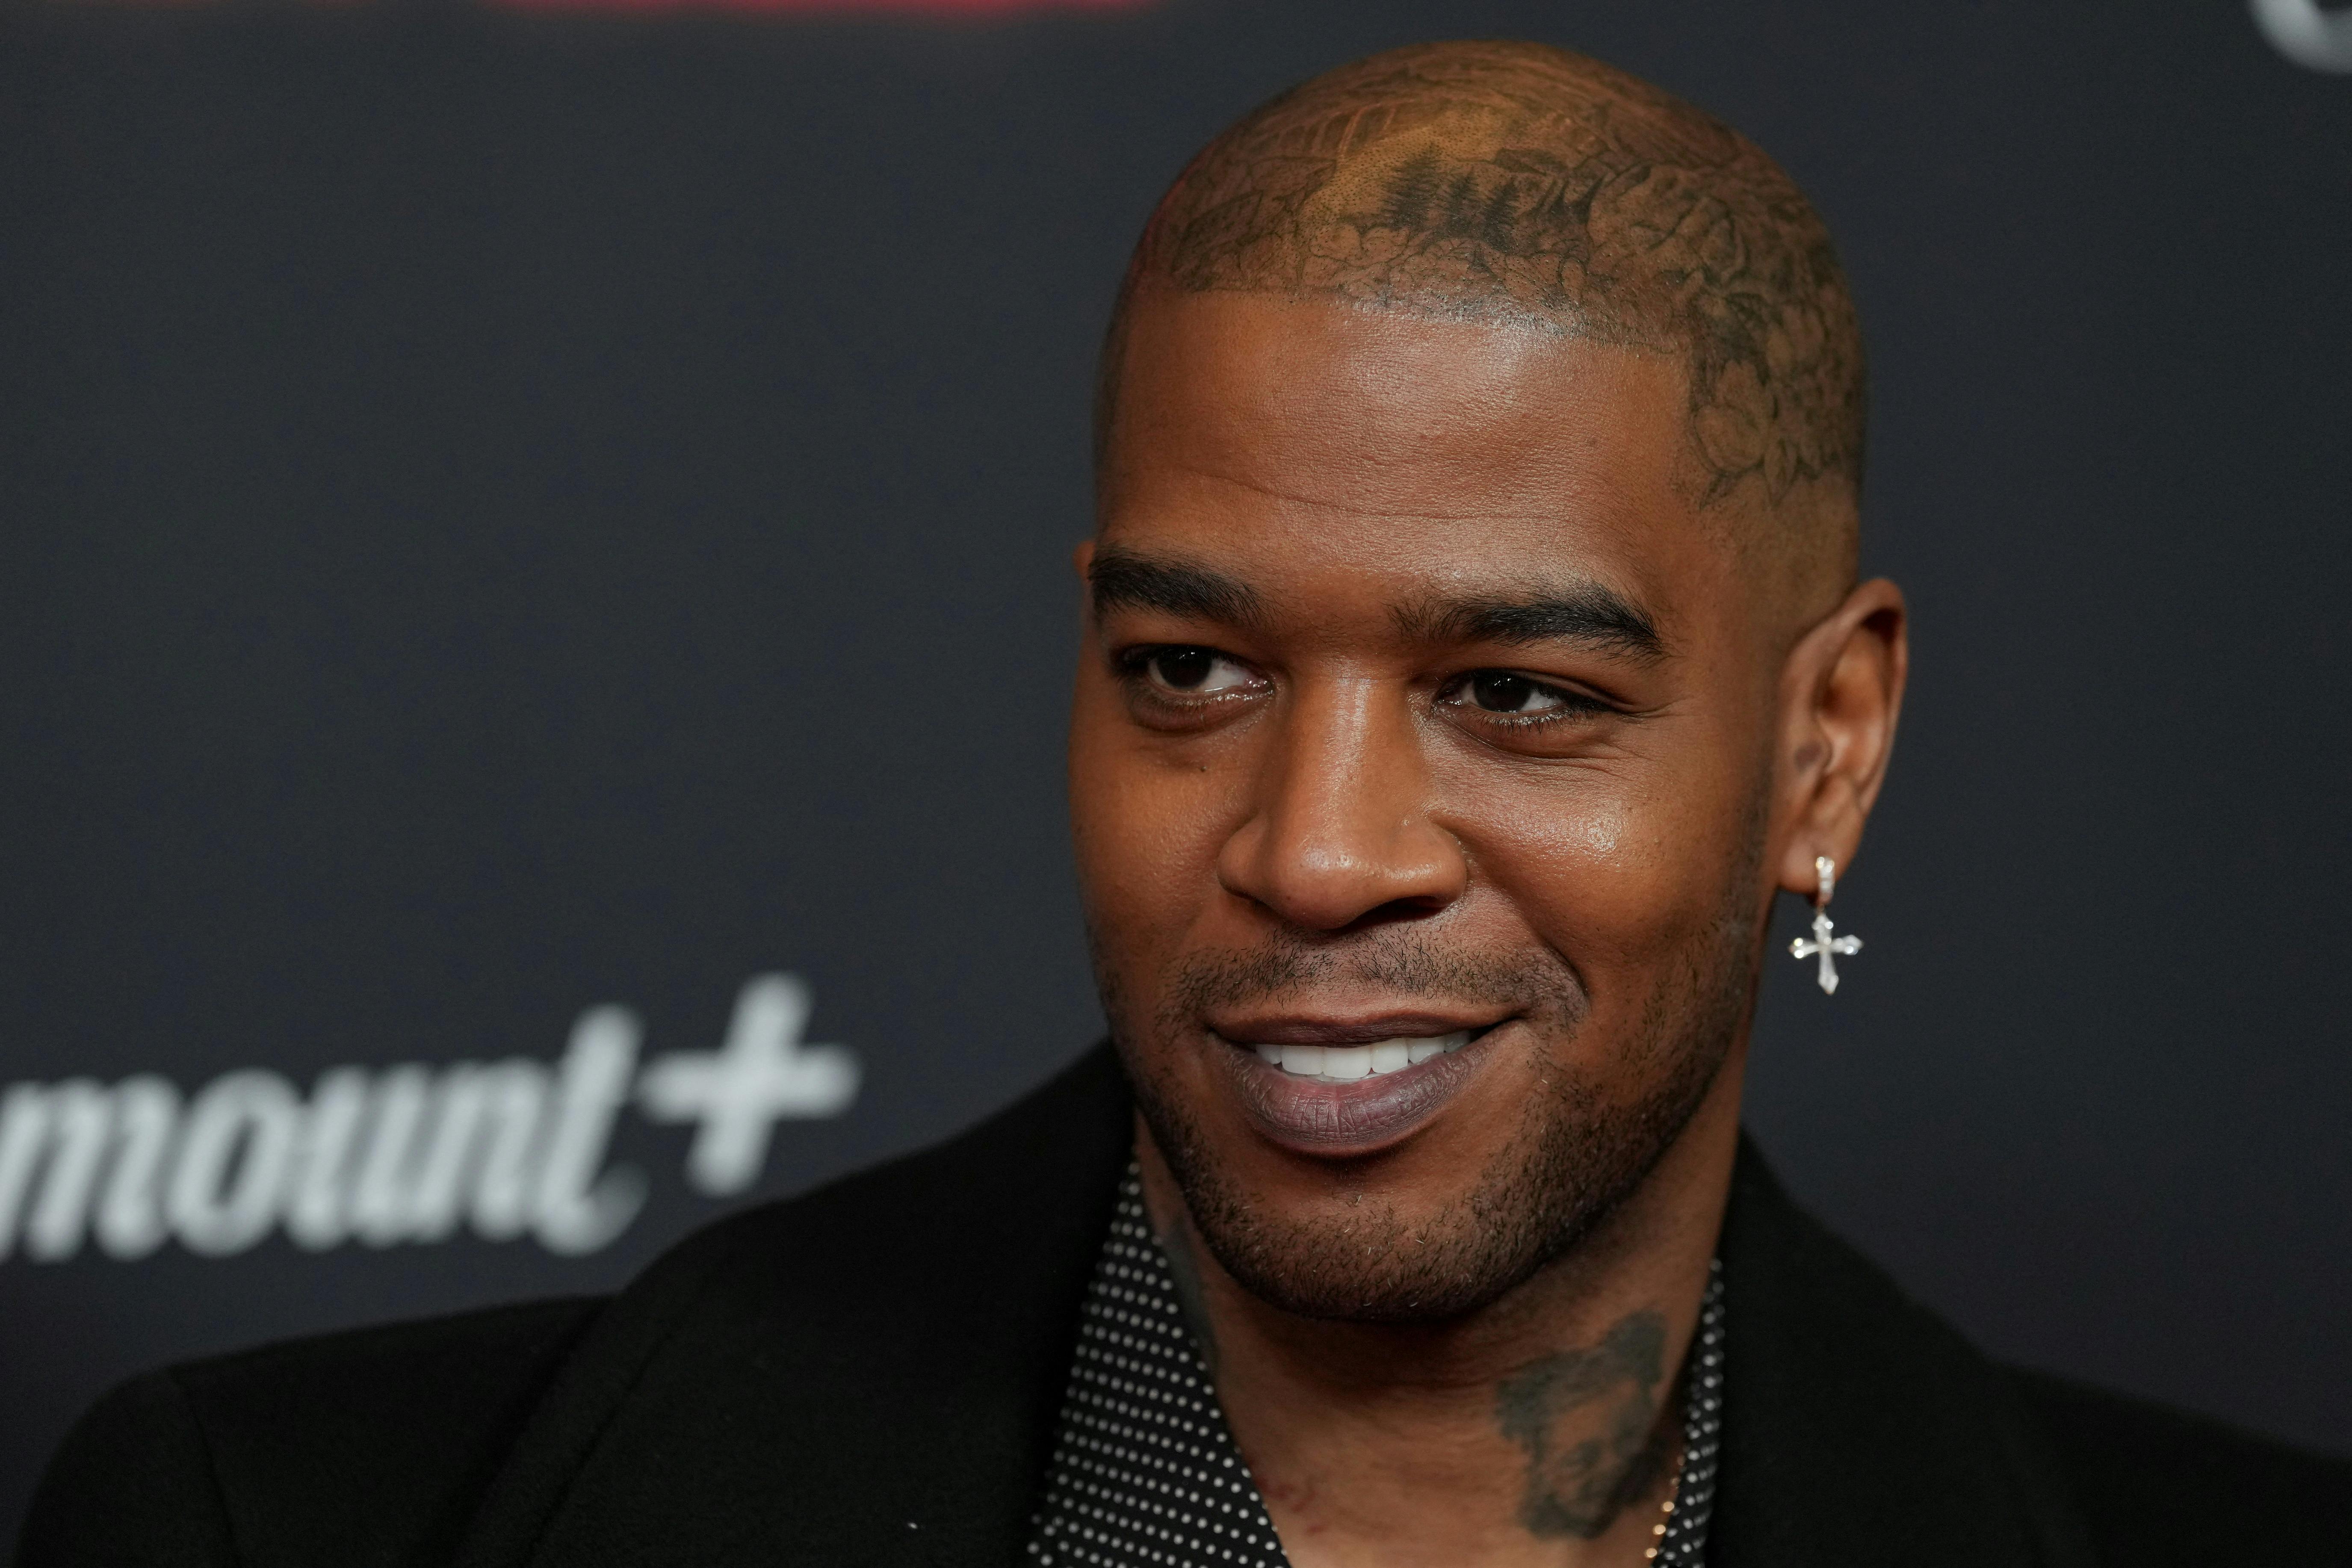 Cast member Scott Mescudi, A.K.A. Kid Cudi, attends the global premiere of the television miniseries "Knuckles" at Leicester Square, in London, Britain, April 16, 2024. REUTERS/Maja Smiejkowska